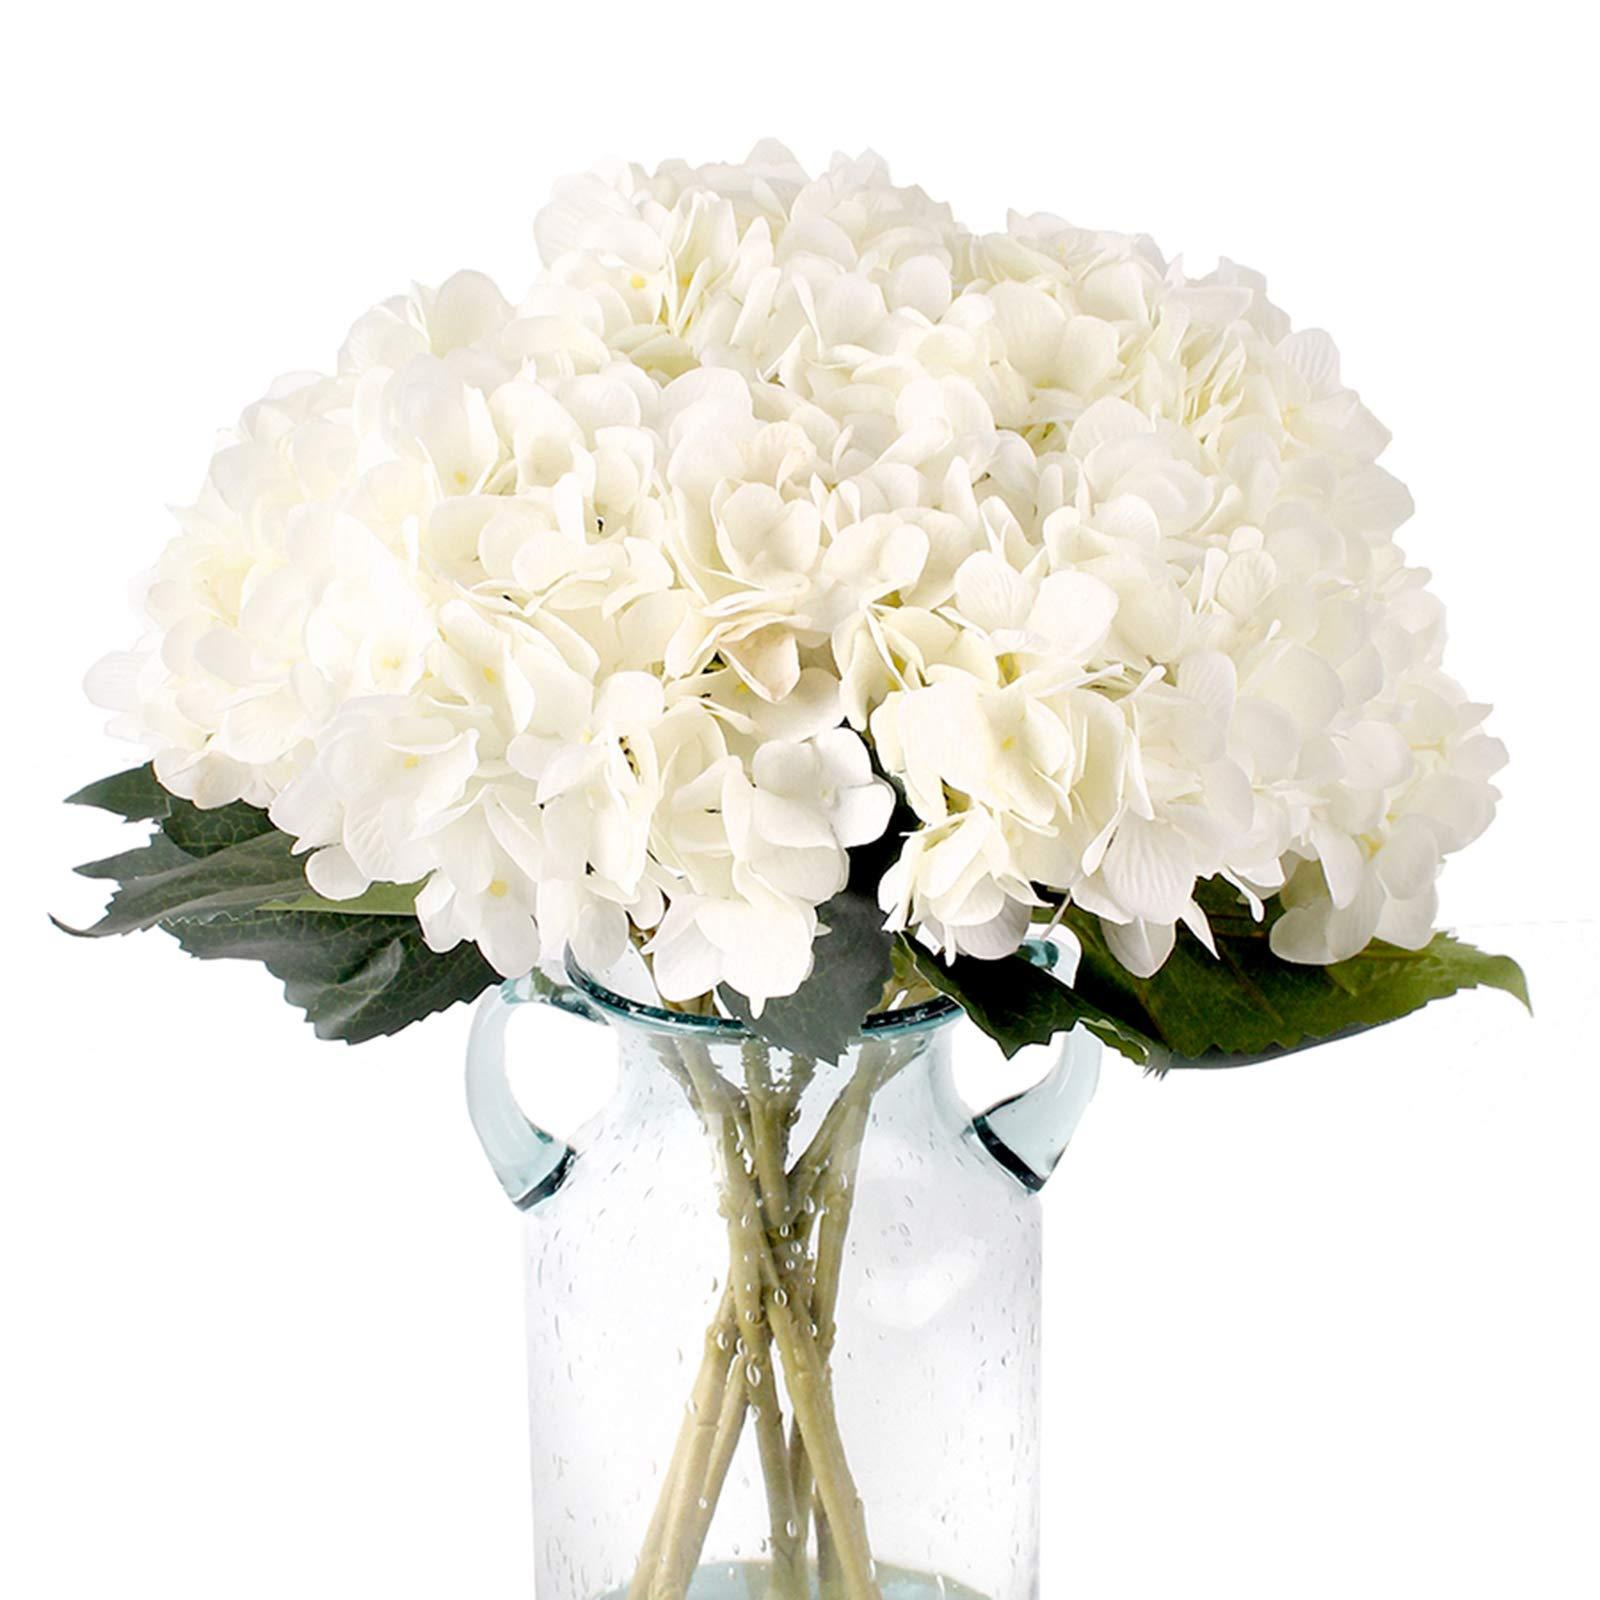 Kimuras Cabin Fake White Flowers Artificial Silk Hydrangea Flowers Bouquets Faux Hydrangea Stems 6Pcs For Home Table Centerpieces Wedding Party Decoration (White)